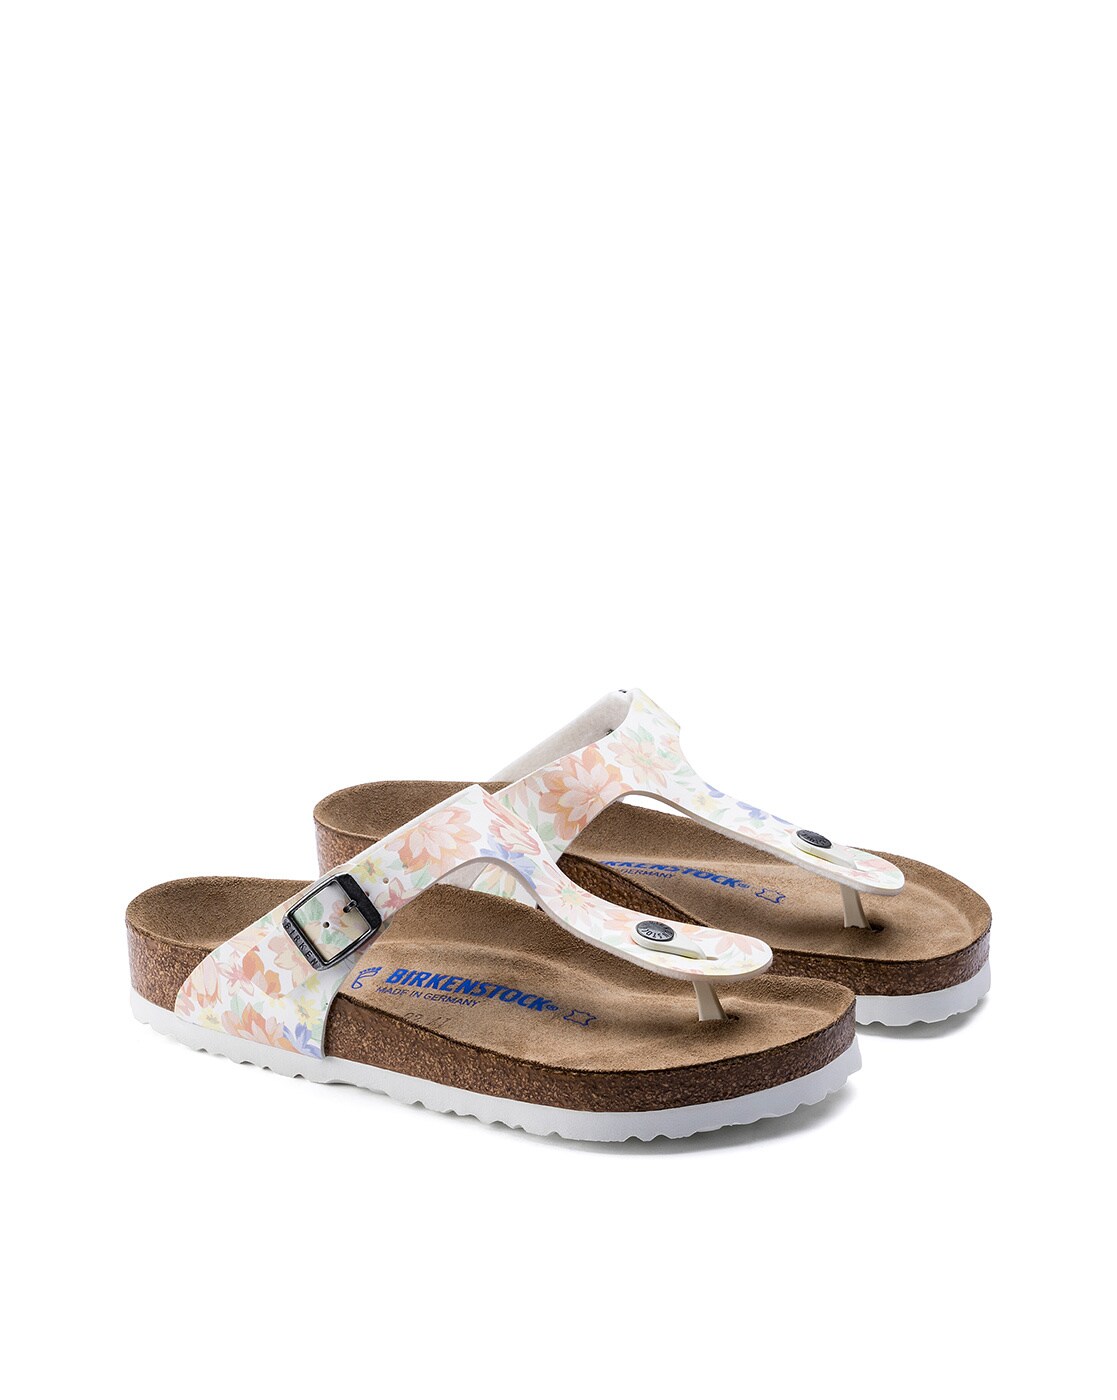 Birkenstock Arizona Nubuck Leather Soft Footbed Womens Sandals - Footwear  from CHO Fashion and Lifestyle UK